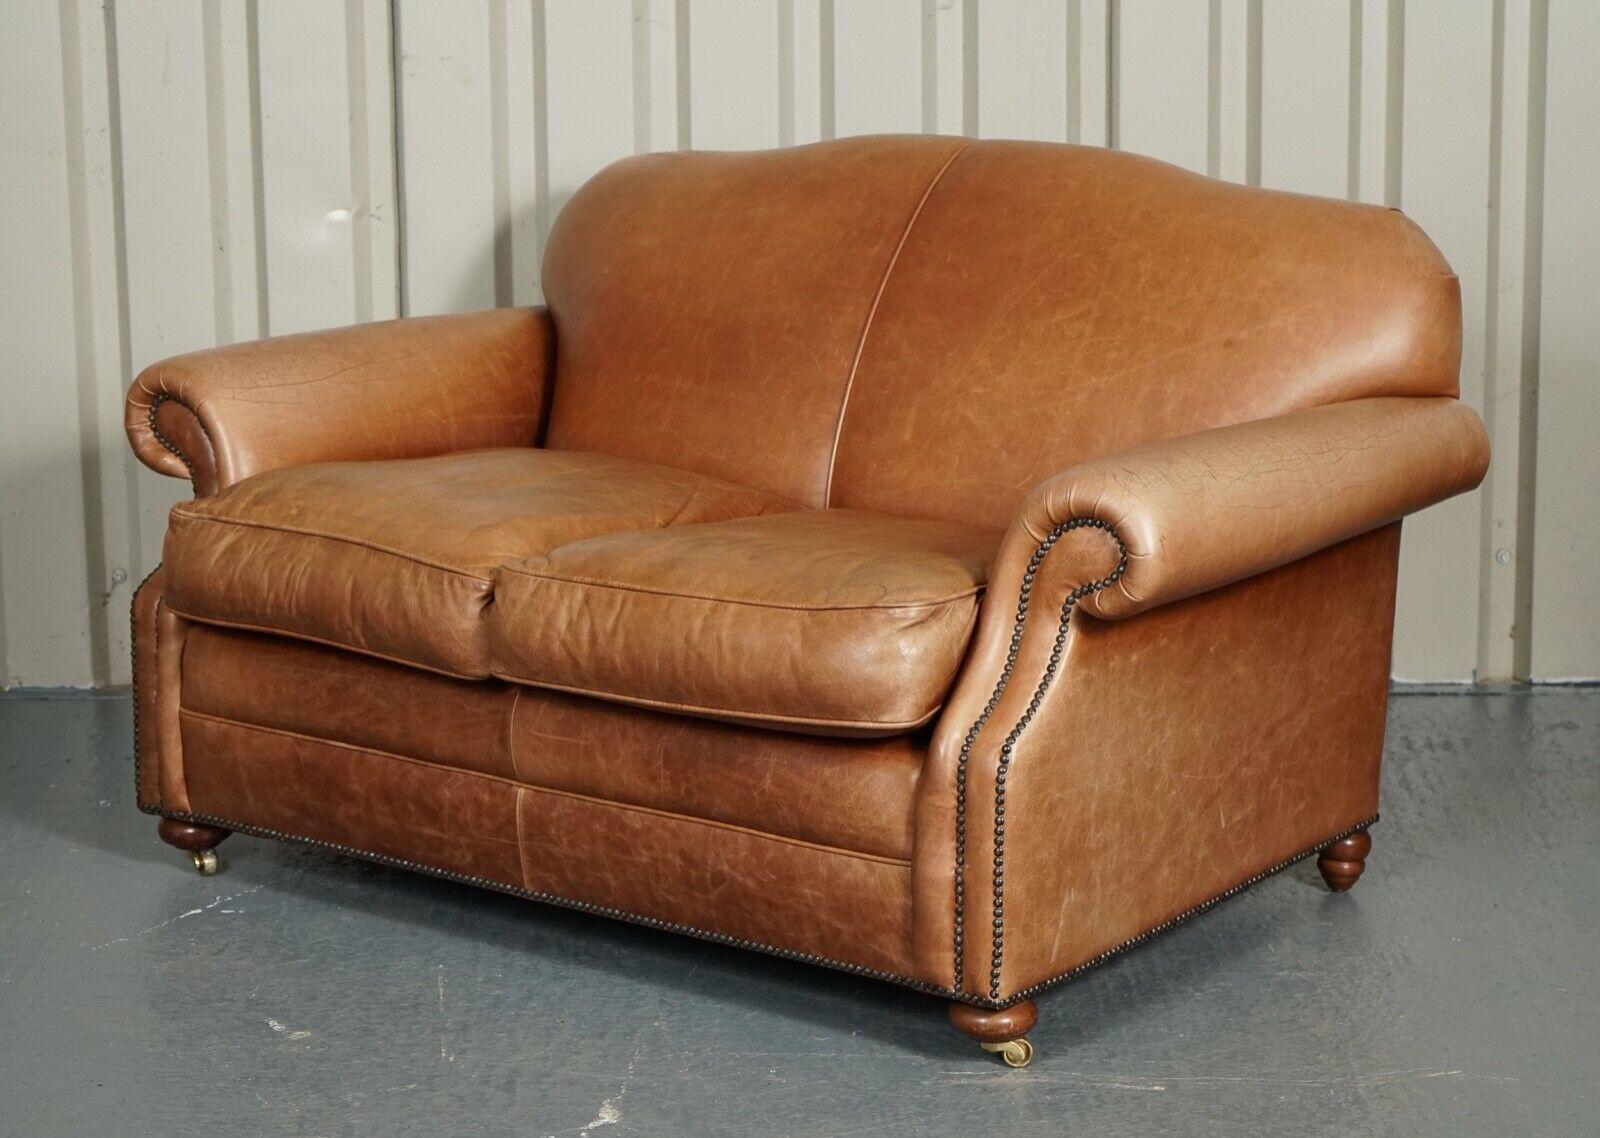 20th Century Vintage Brown Leather 2 to 3 Seater Sofa by Laura Ashley